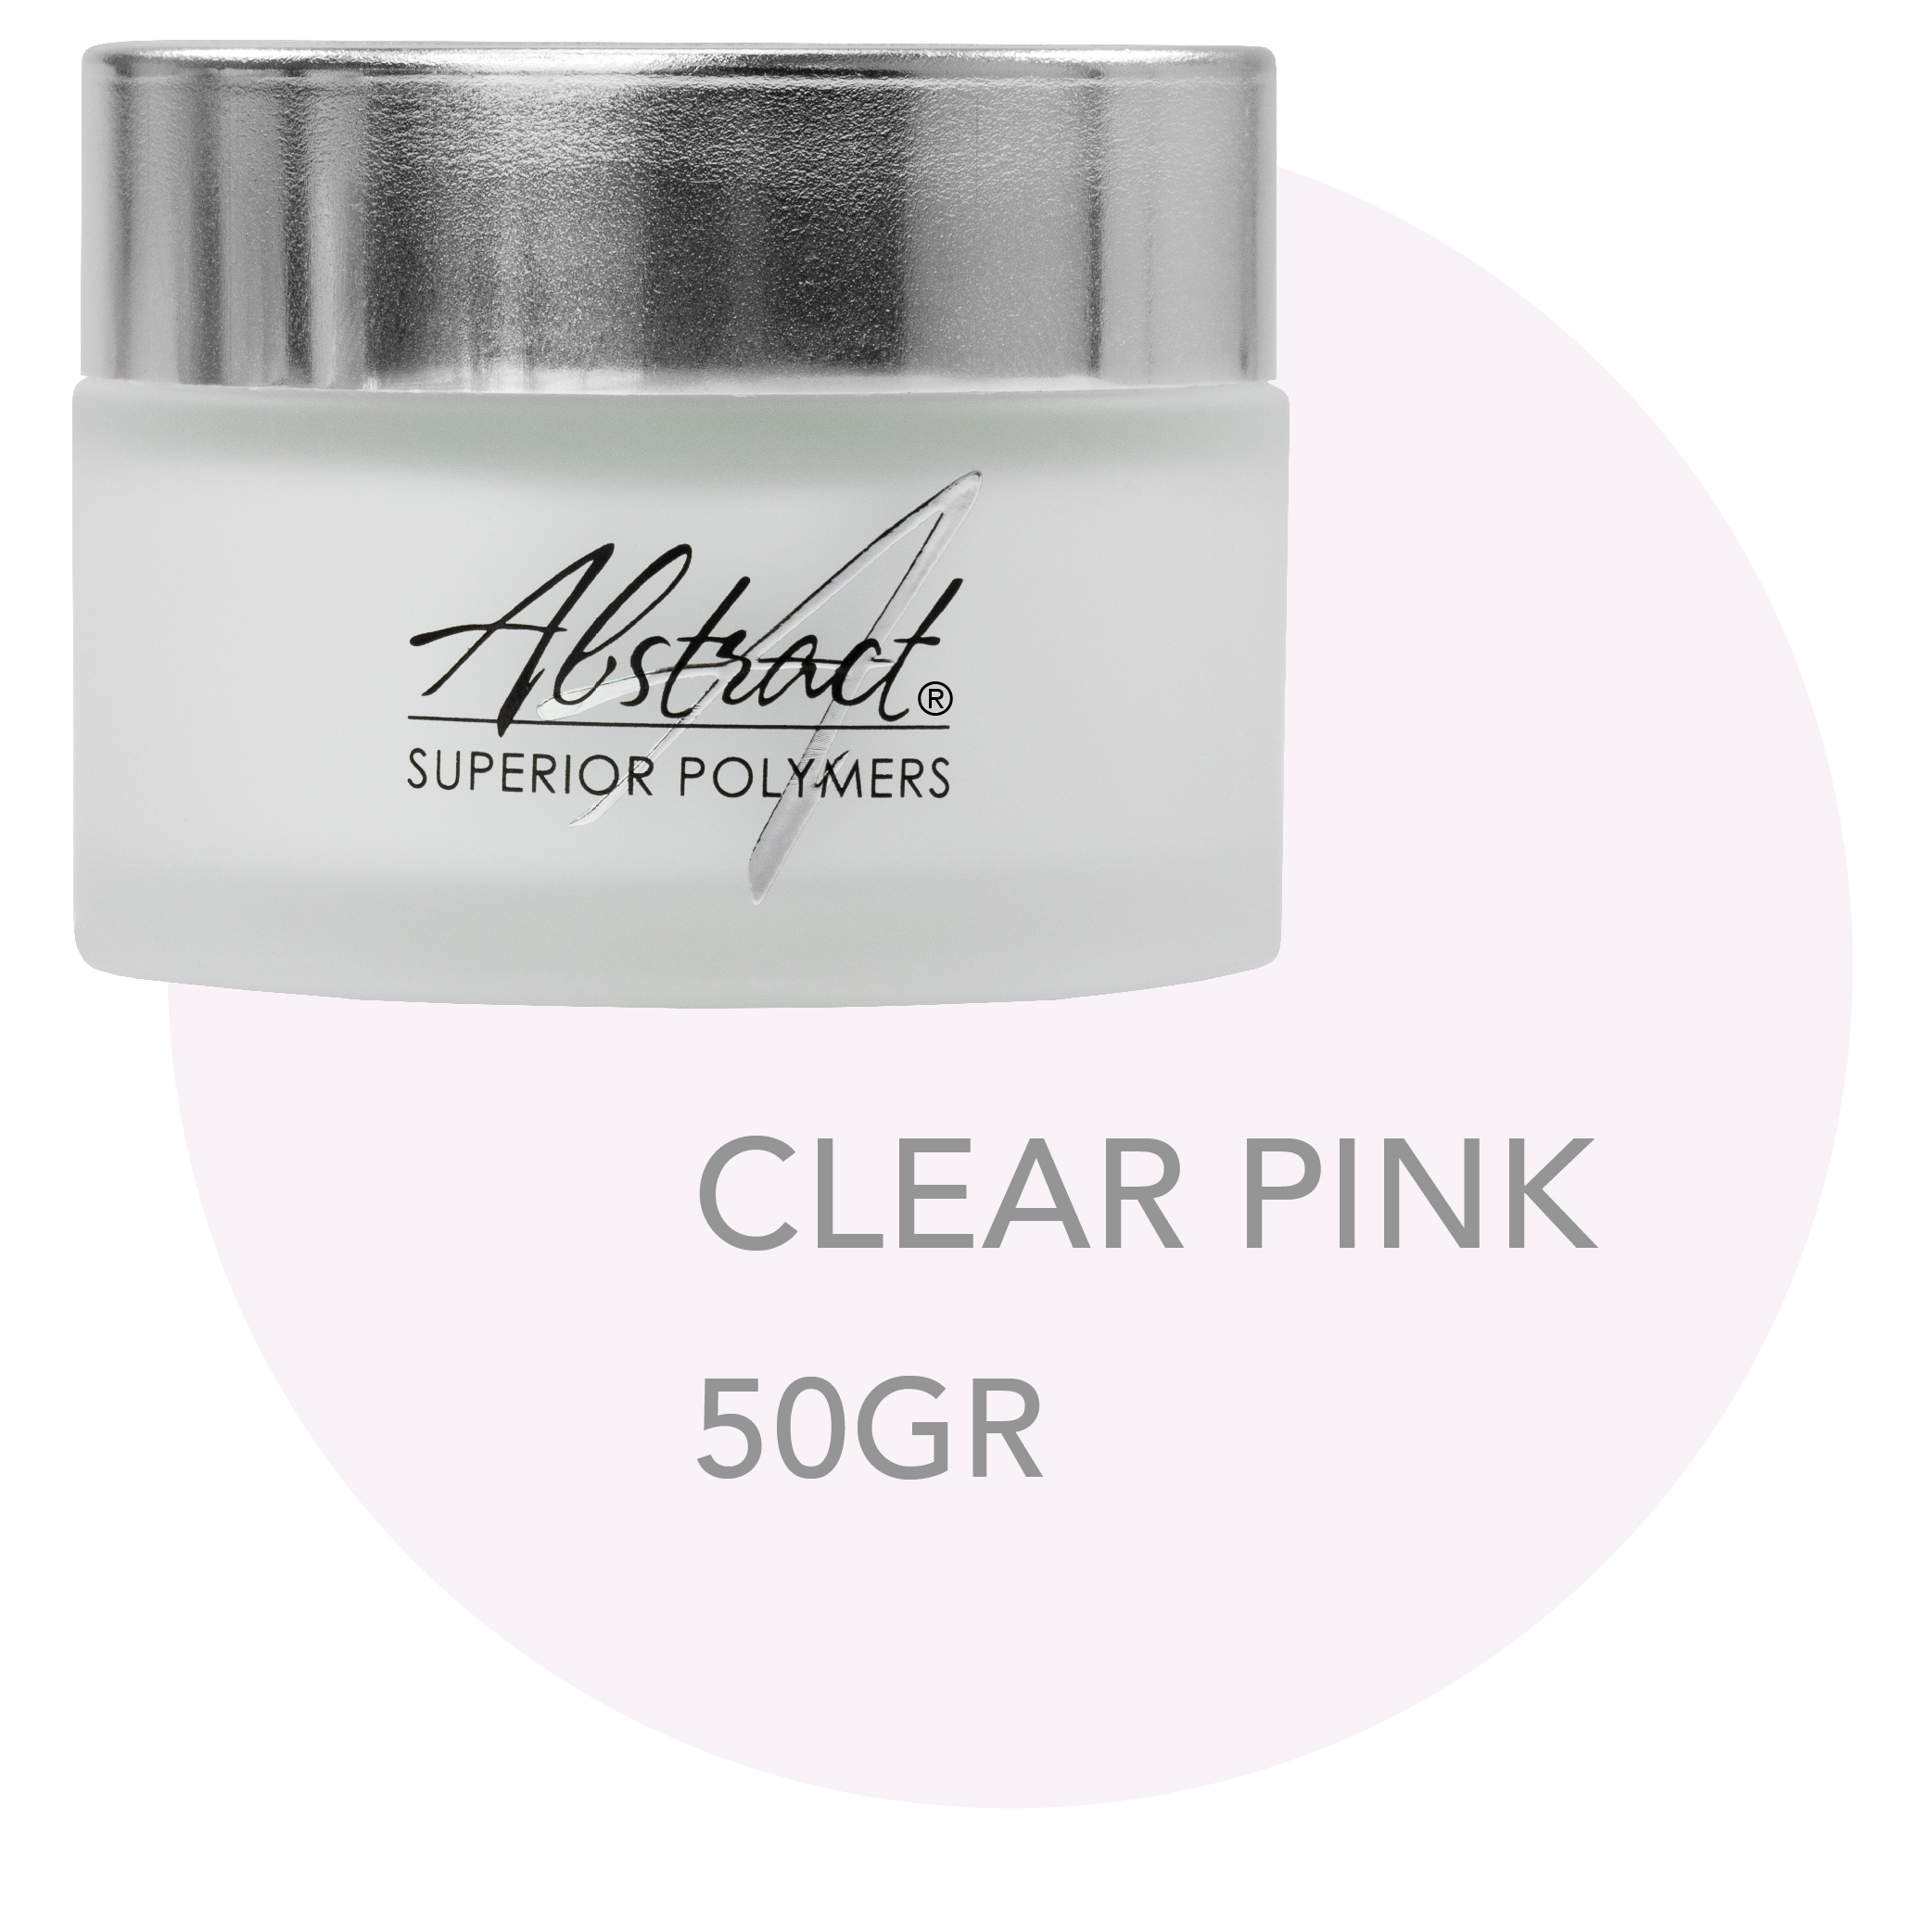 Superior Polymer CLEAR PINK 50gr, Abstract | 233453